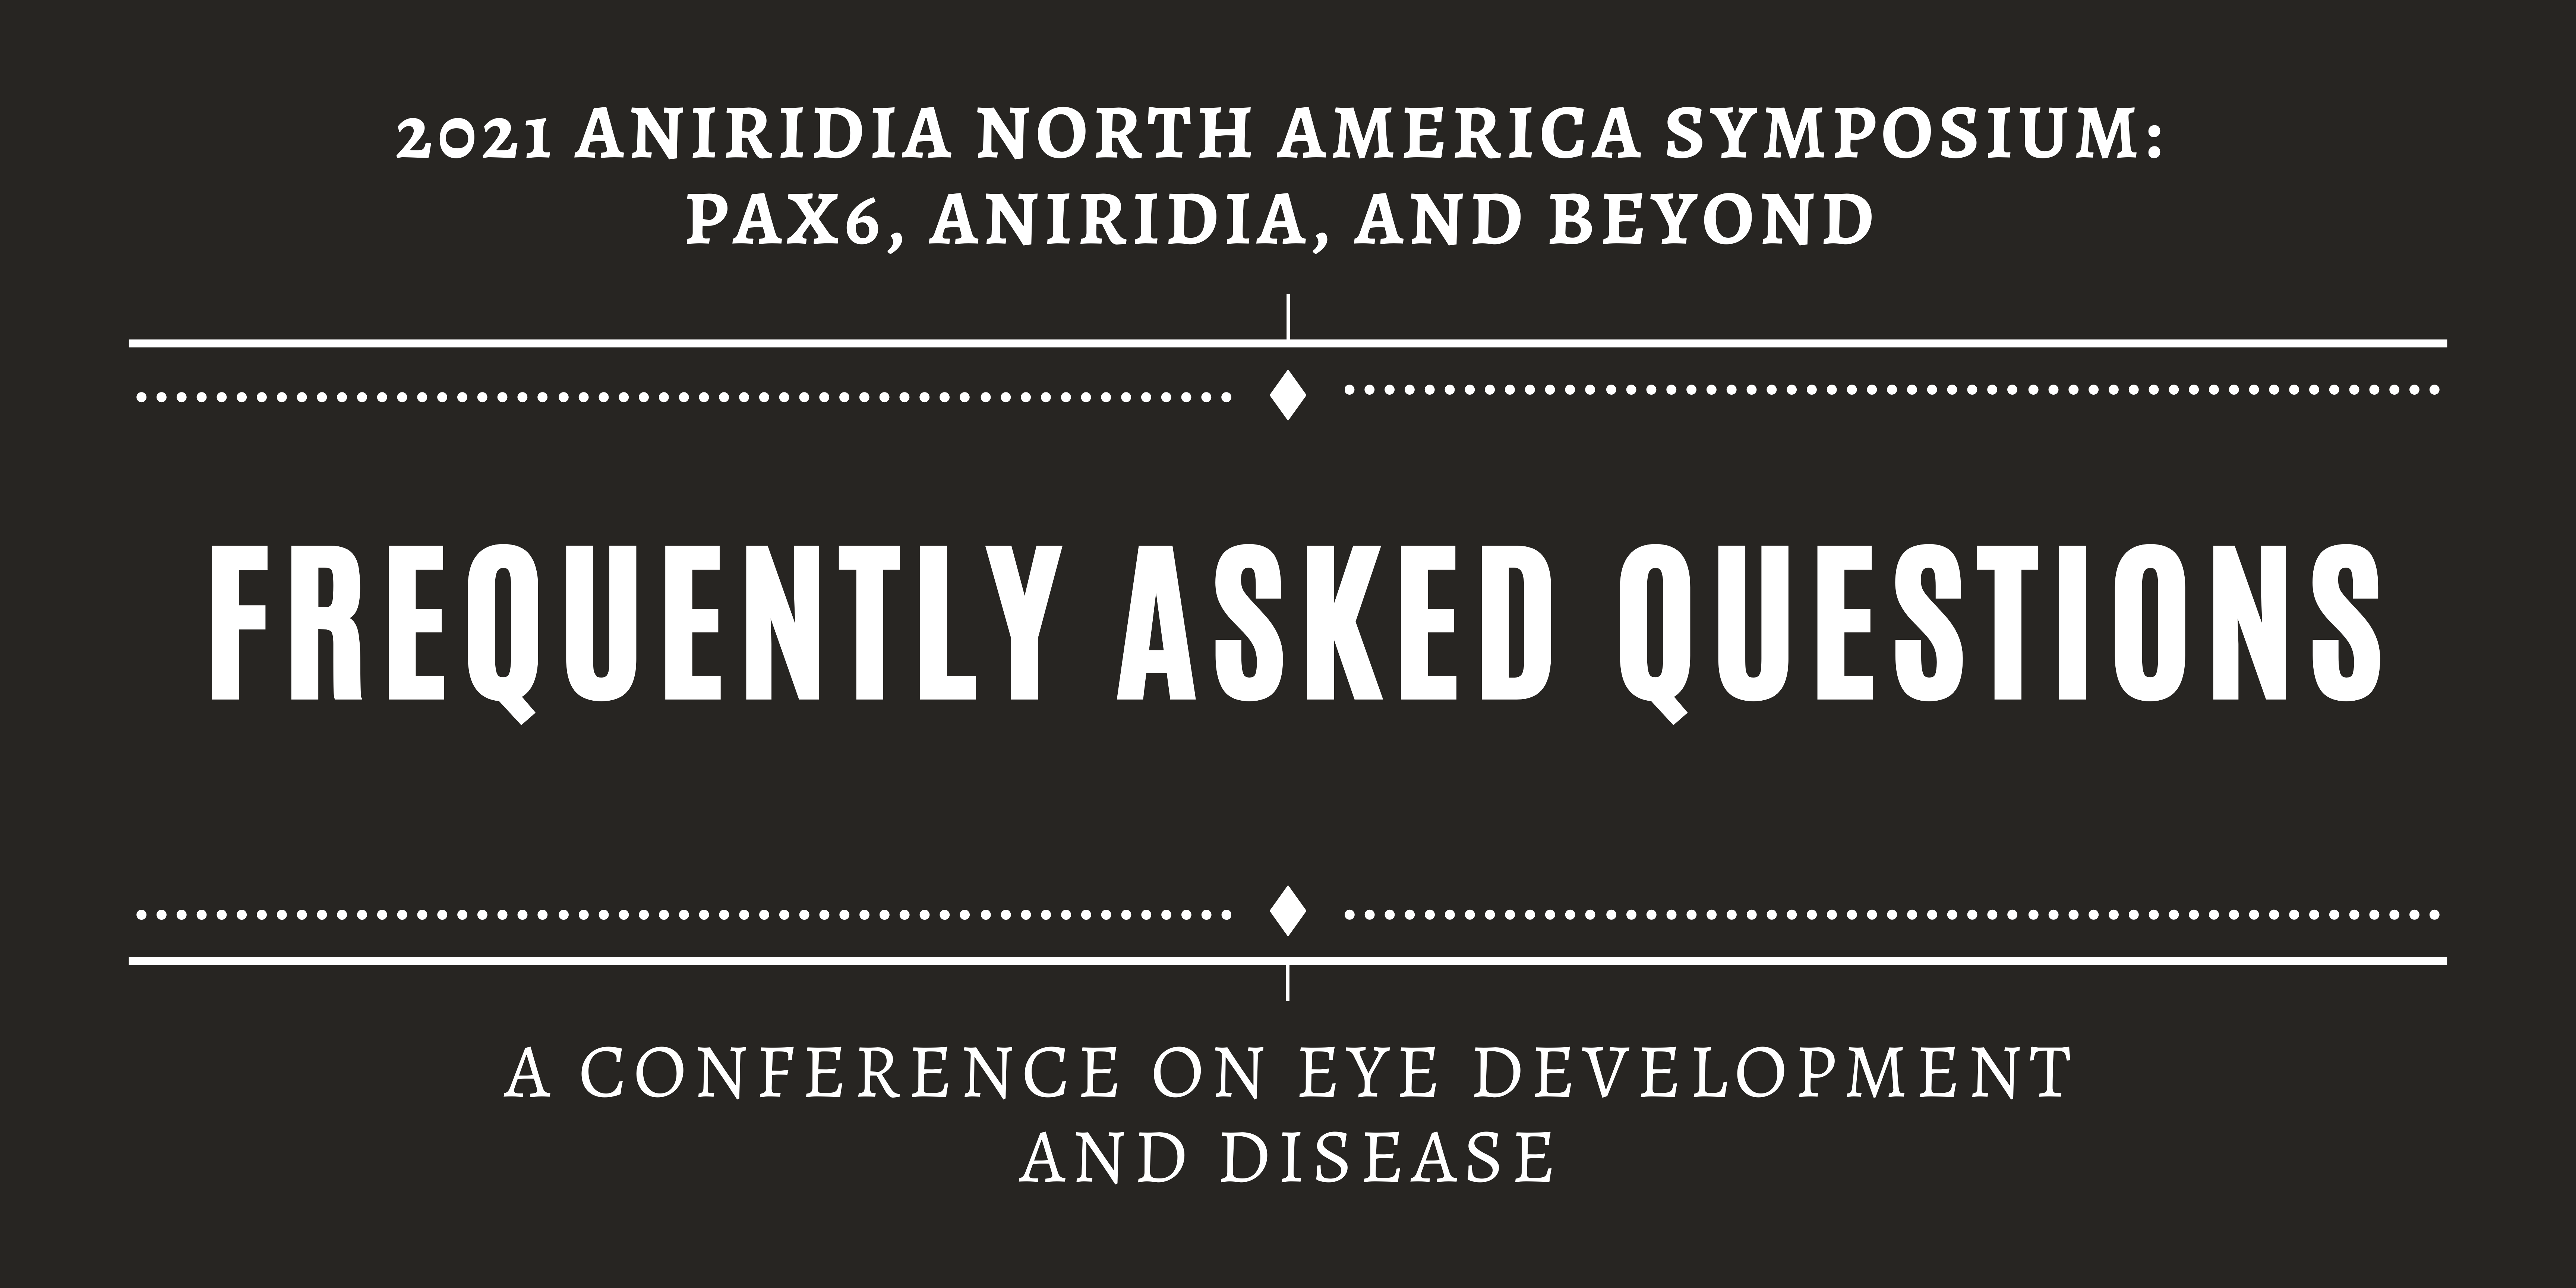 Black Banner wth the words "2021 Aniridia North America Symposium: PAX6, Aniridia, and Beyond, Frequently Asked Questions, A Conference on Eye Development and Disease